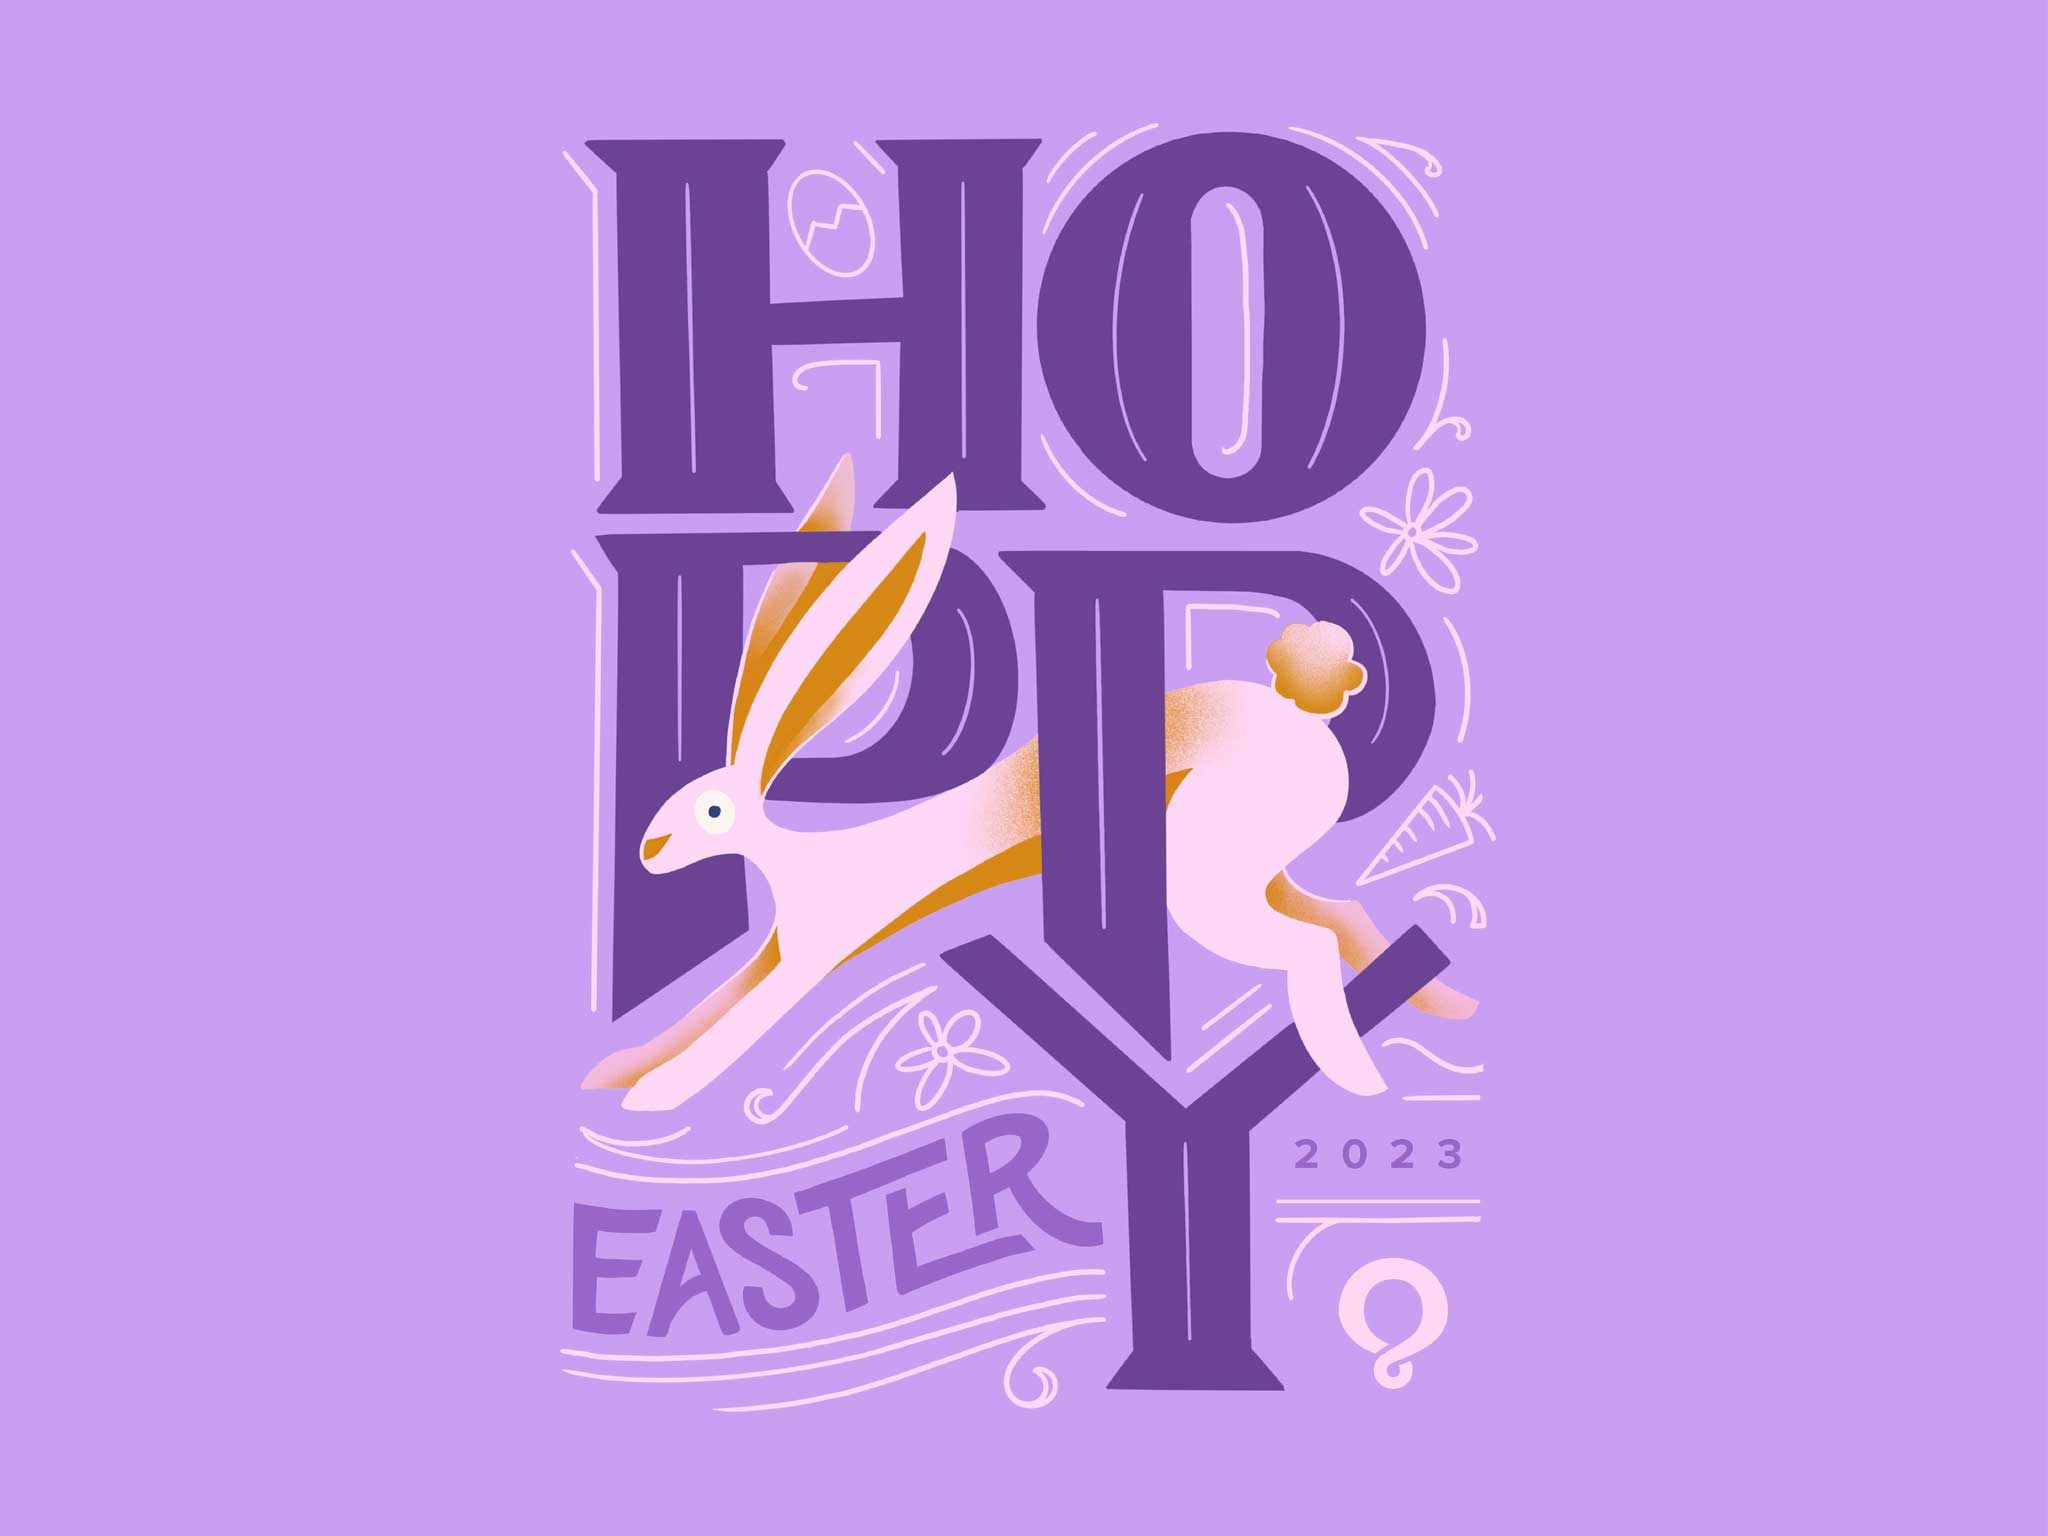 Hand illustrated text that reads "Hoppy Easter" with a rabbit intertwined with the two P's in Hoppy.